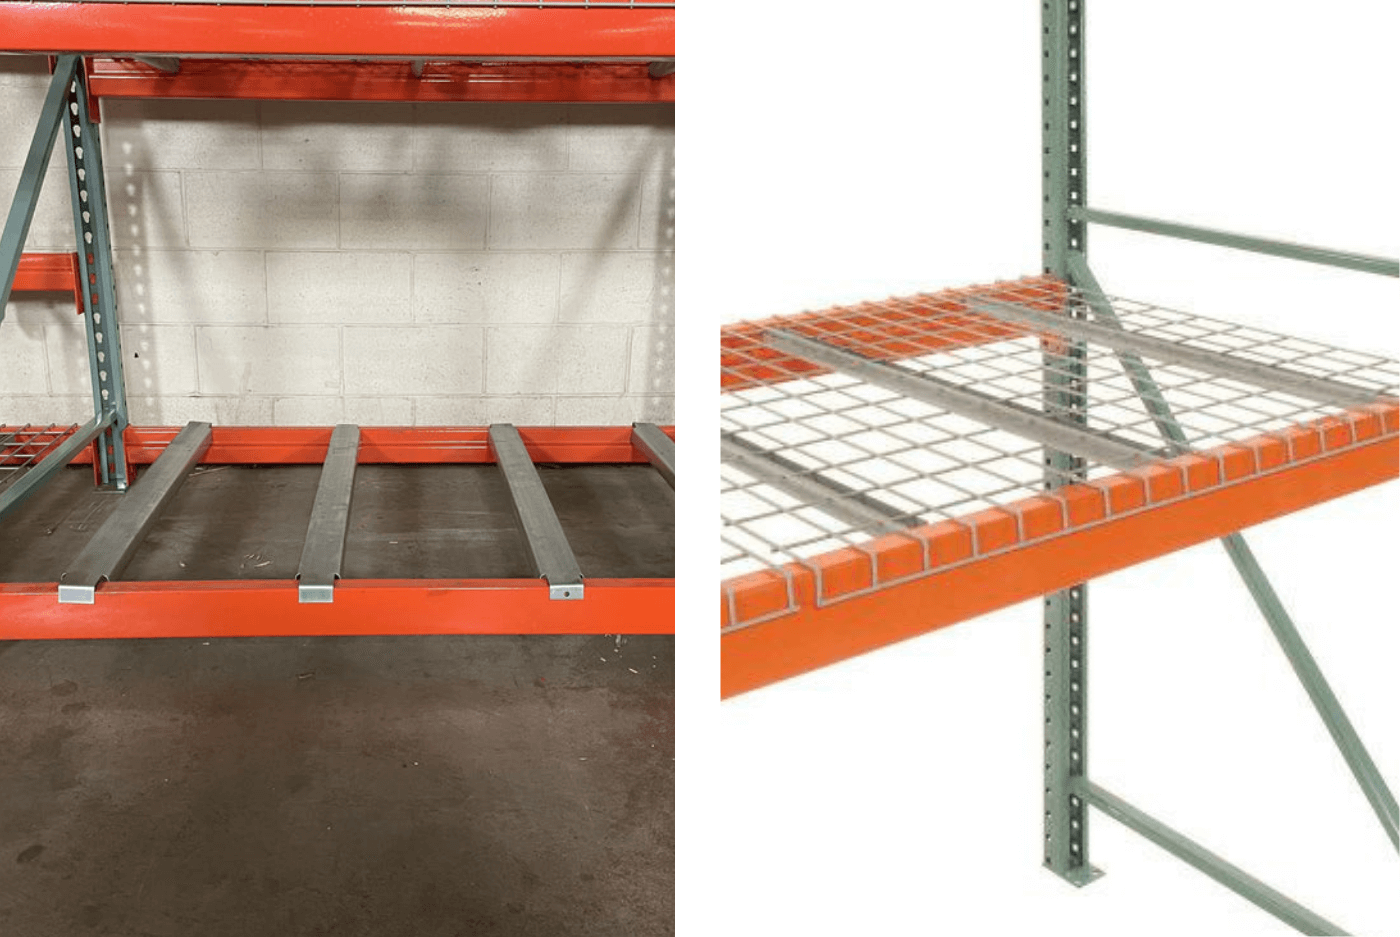 Pallet Rack Supports vs Wire Decking: Which Should I Use